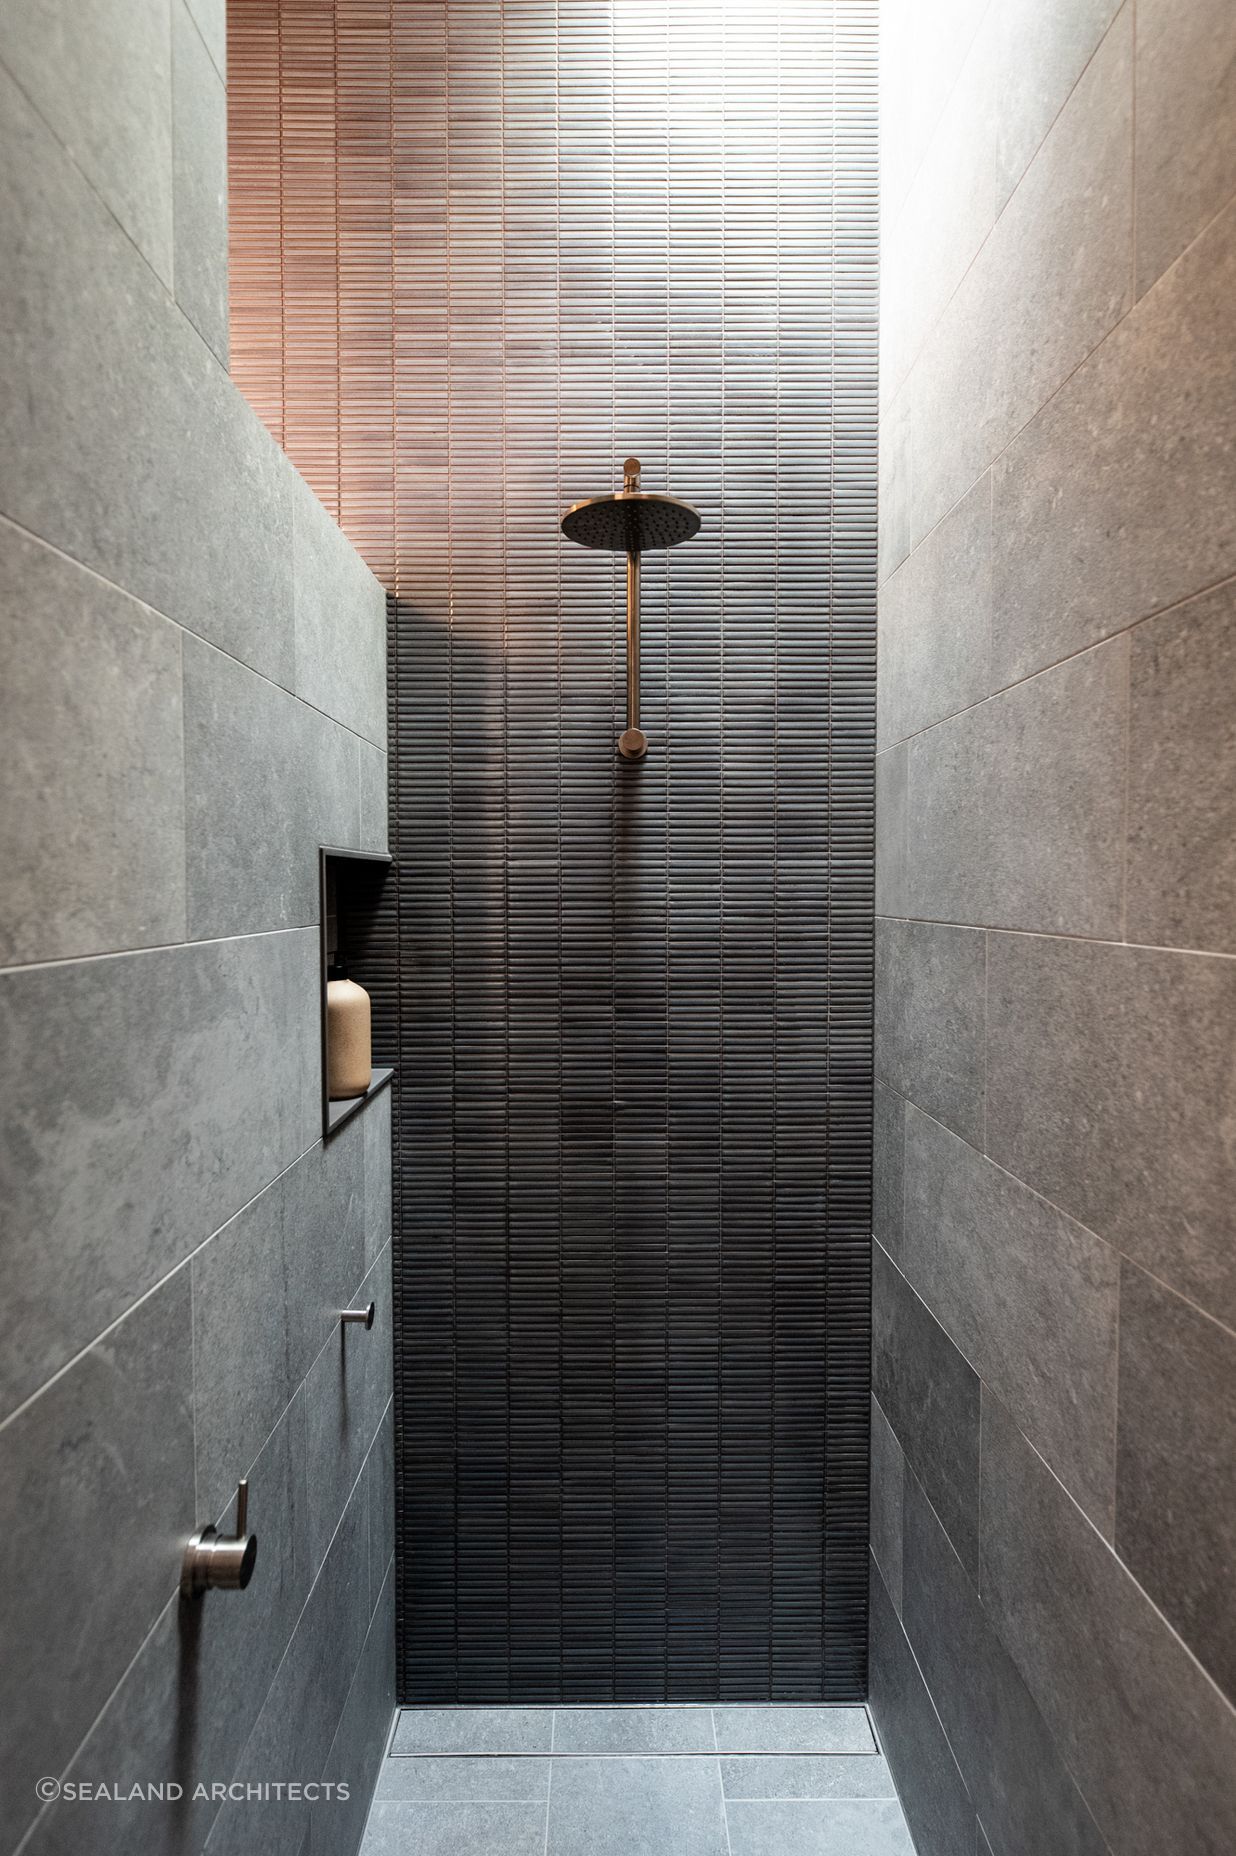 A renovation to an existing bathroom can add value to your home. Photography: Emma Bourne